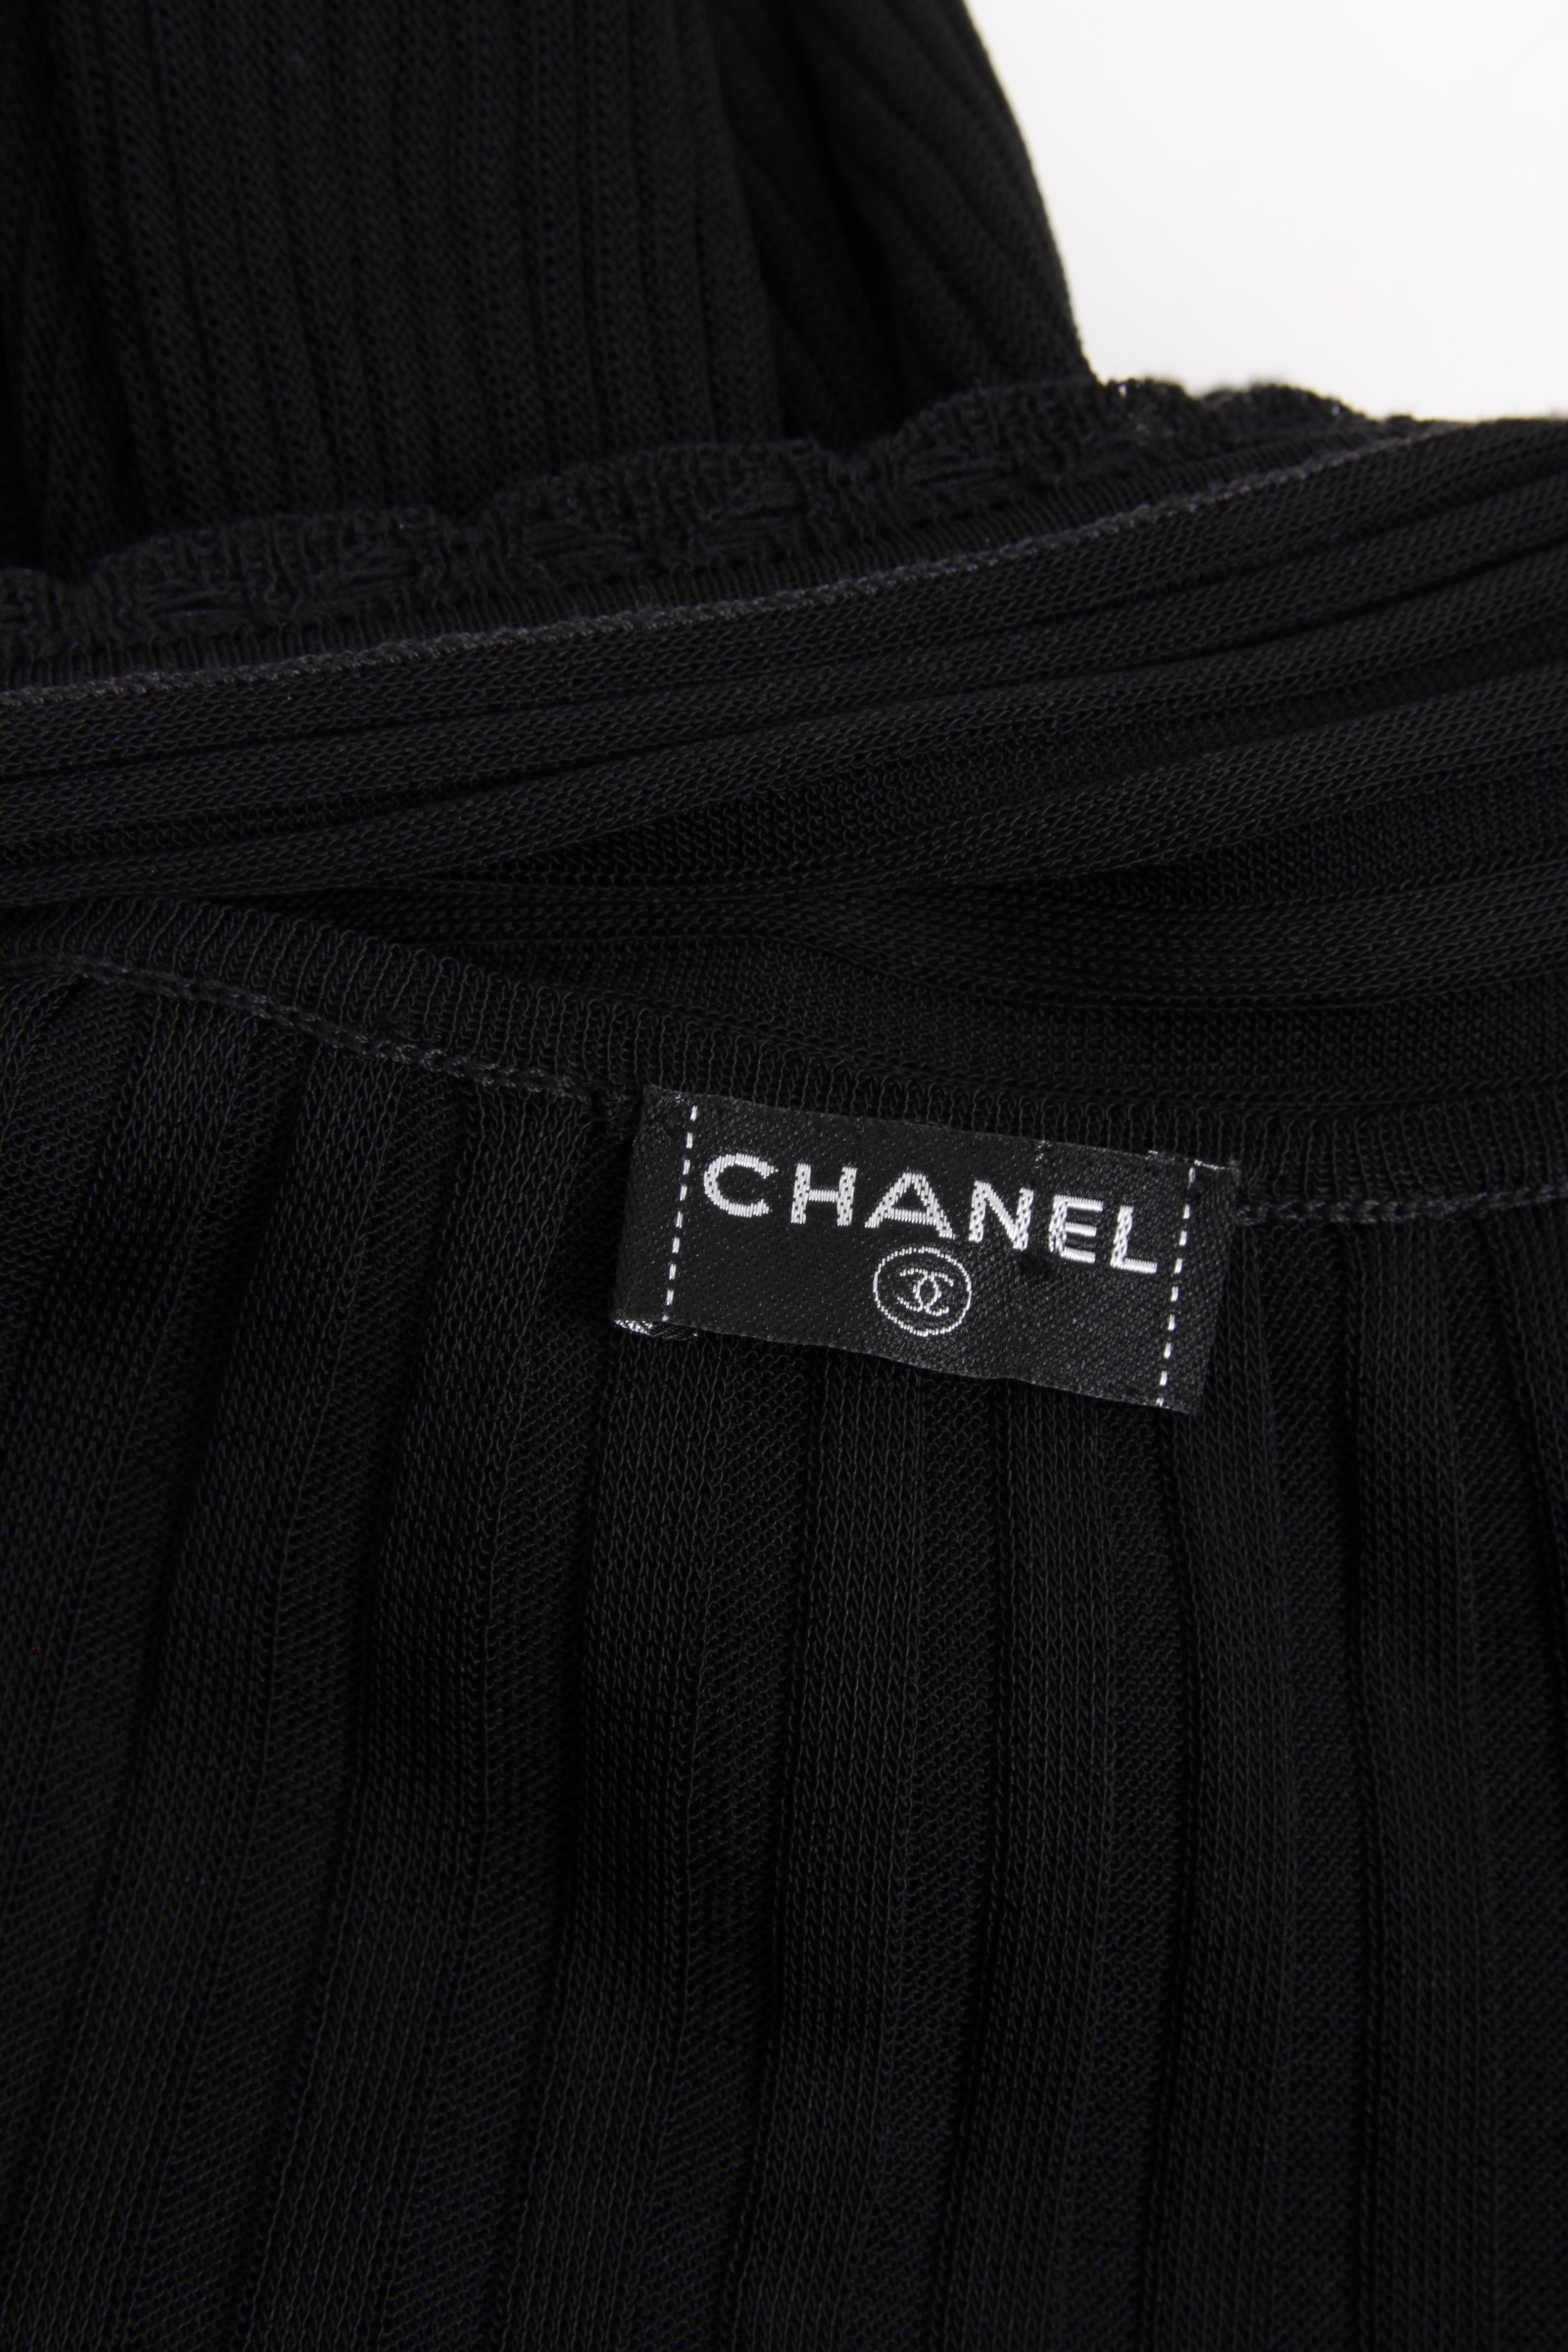 Chanel Fall/Winter 2007 black layered short sleeve dress For Sale 3